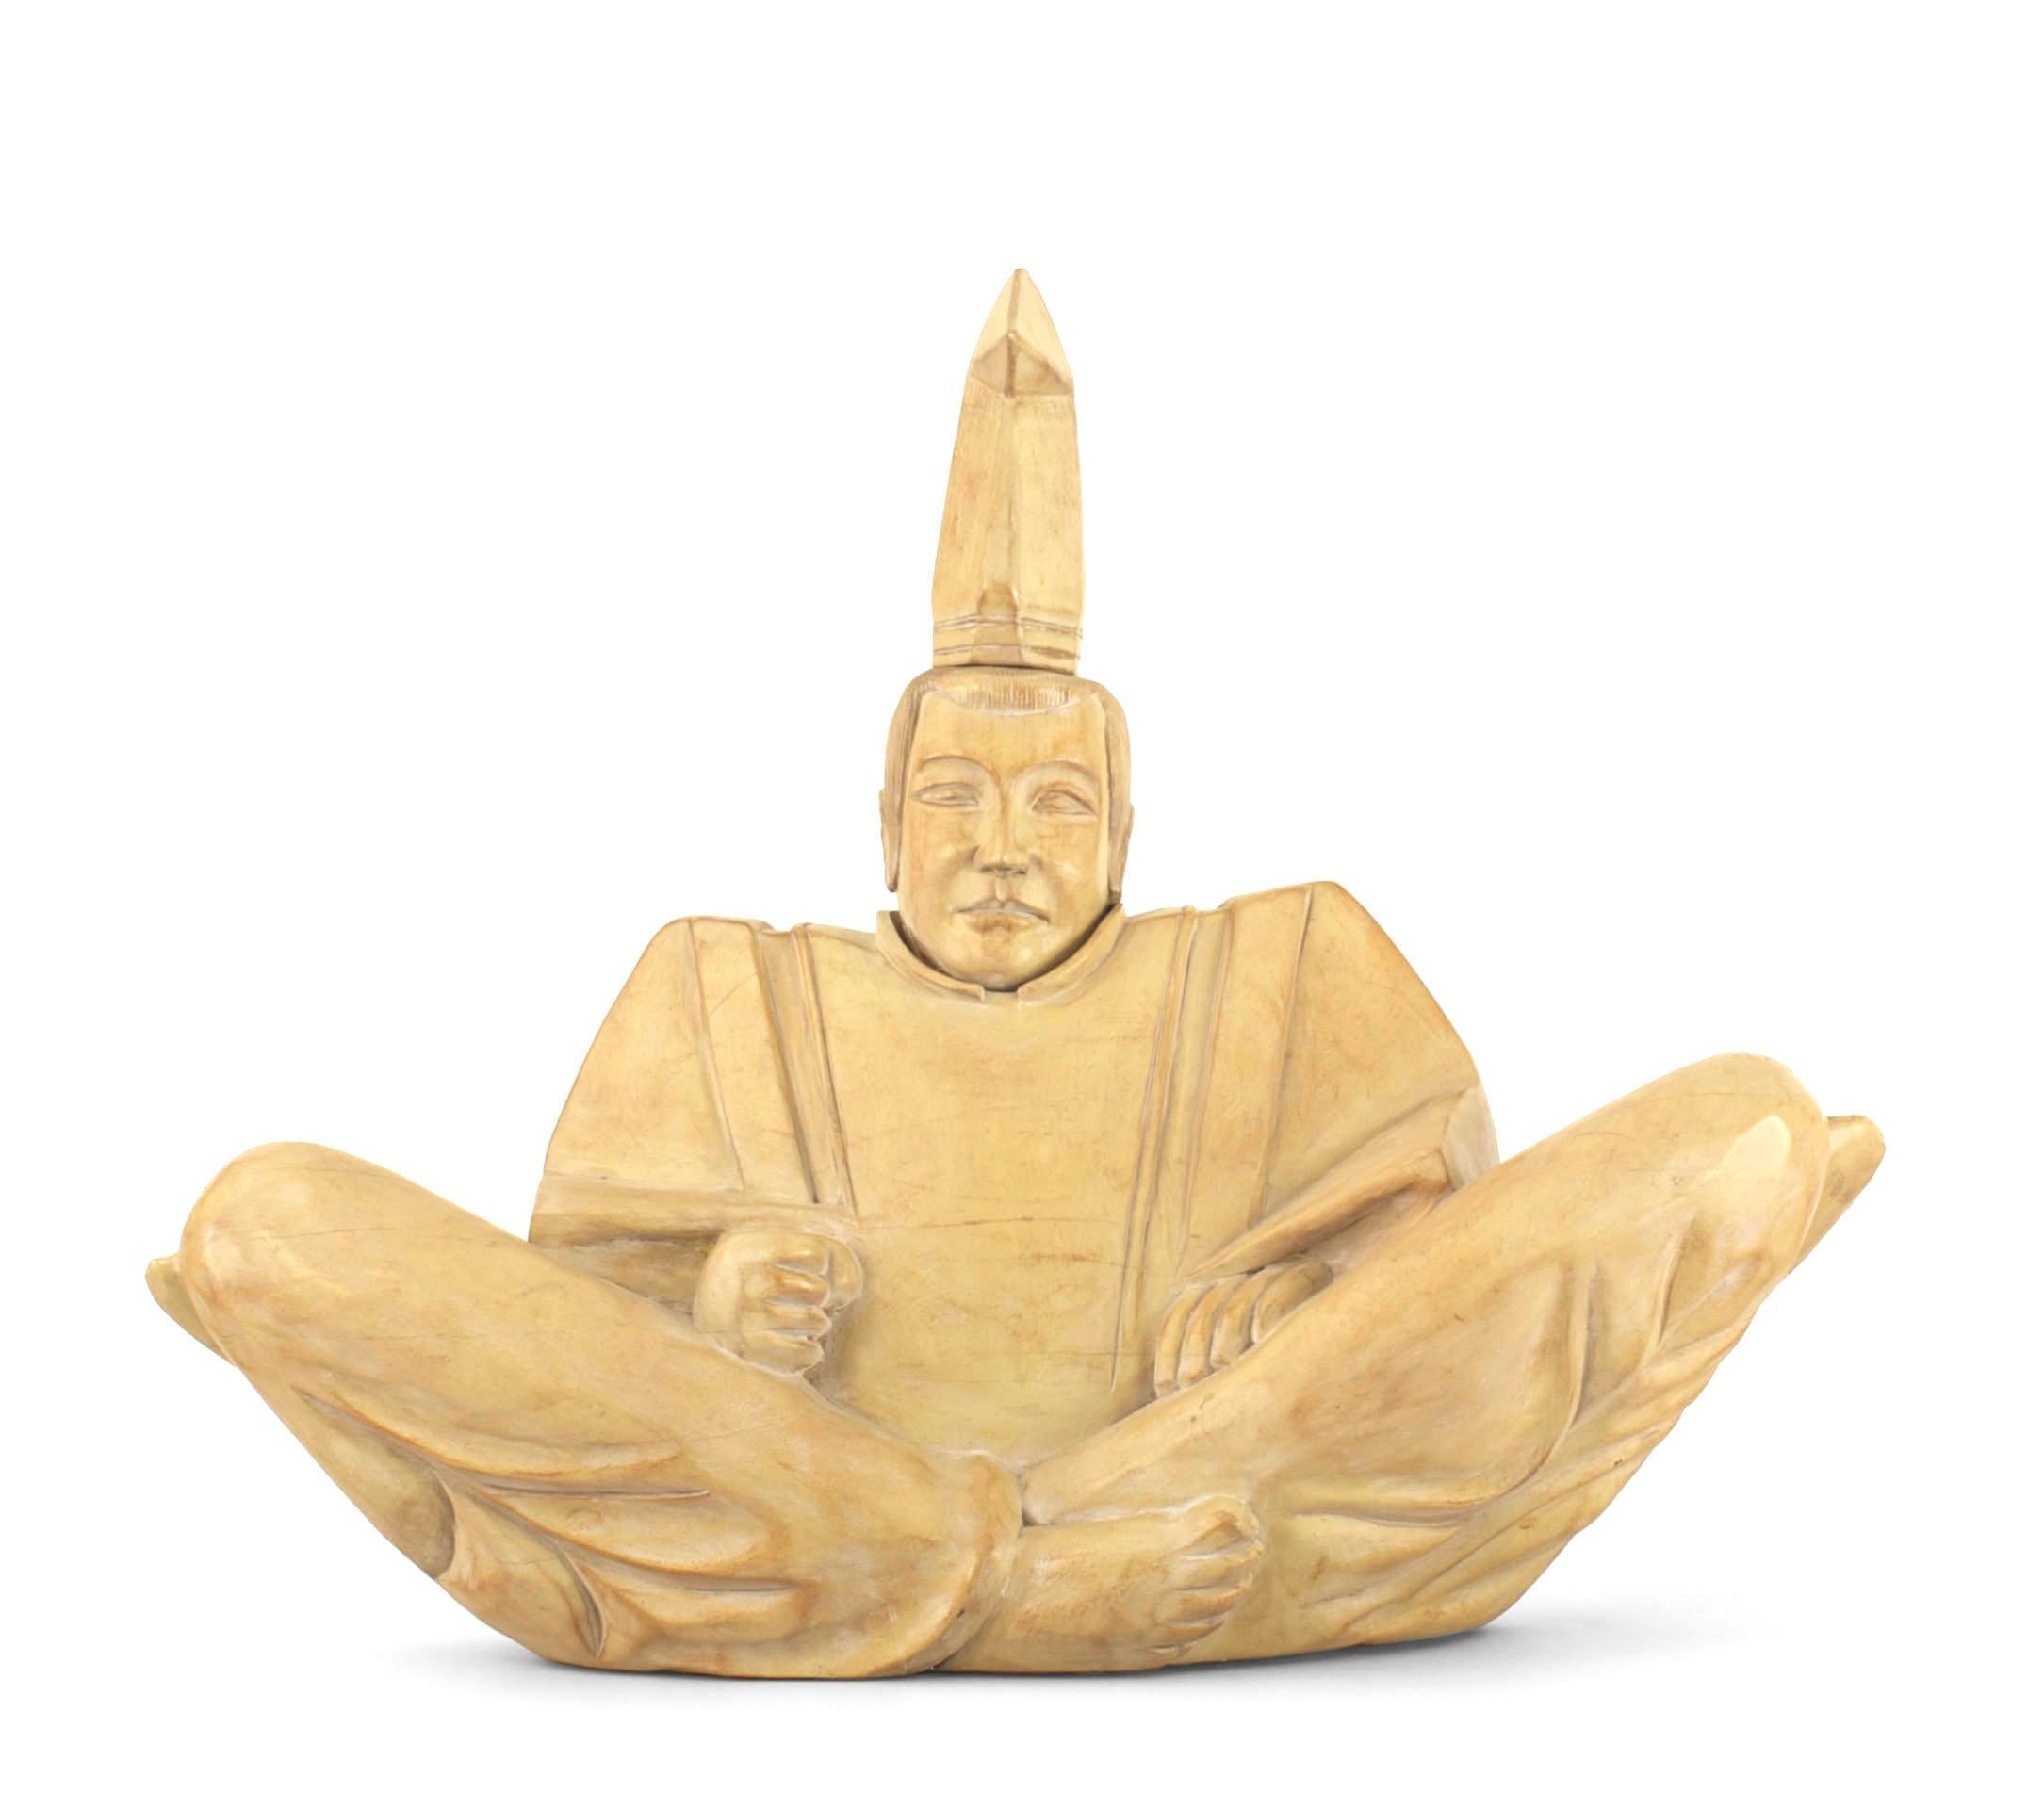 Asian Japanese Mid-Century Modern bleached wood carved religious figure of a Shinto Priest seated in Lotus position with legs crossed.
